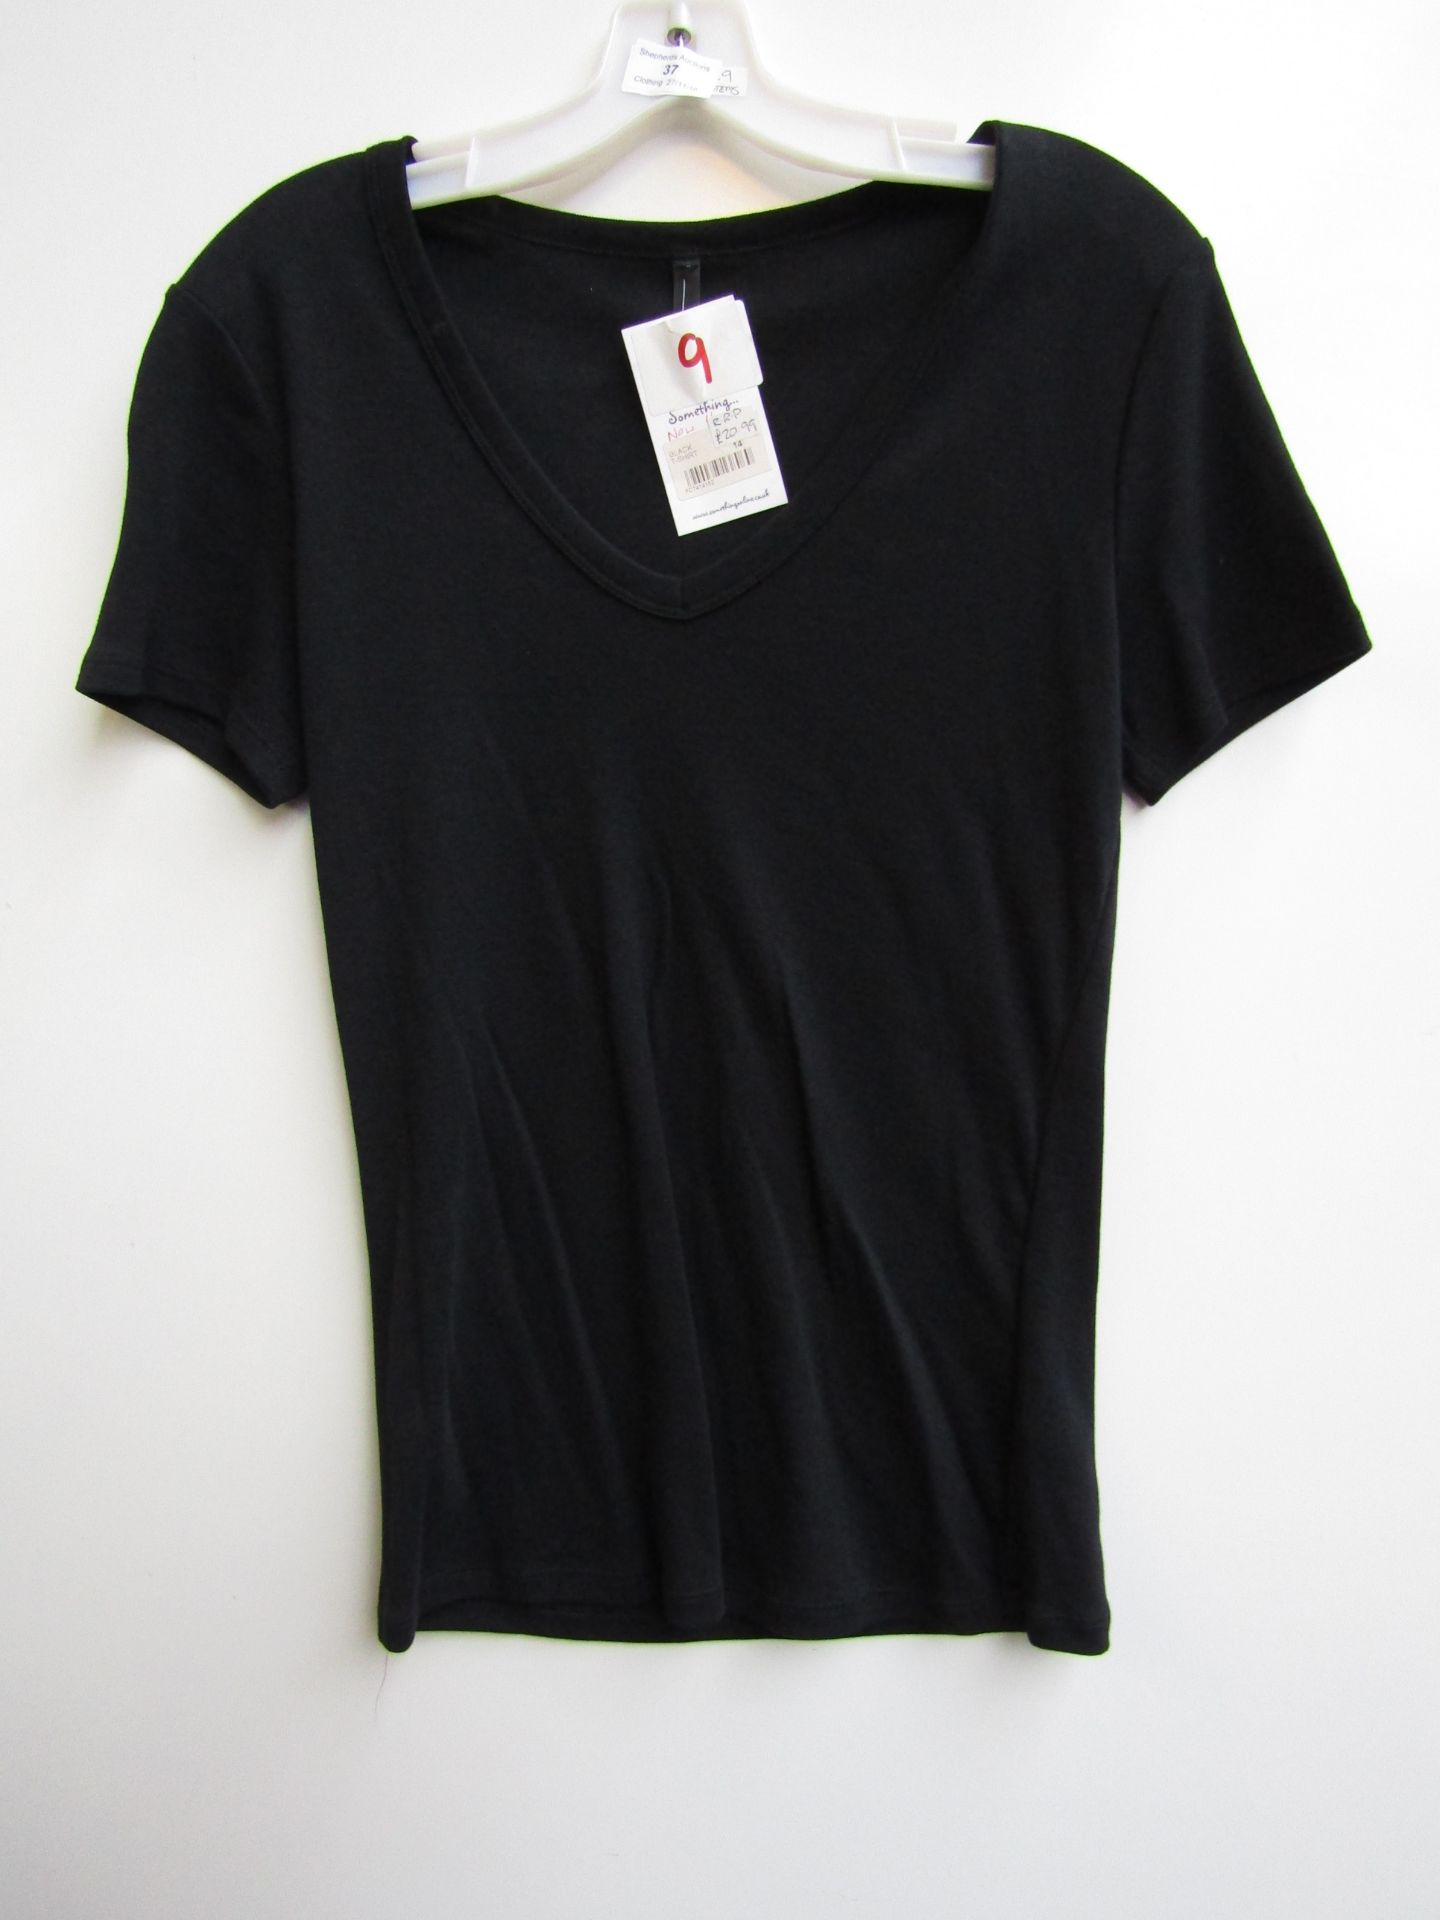 Ladies Black Vneck T-Shirt, new with tag, size 14, RRP £20.99